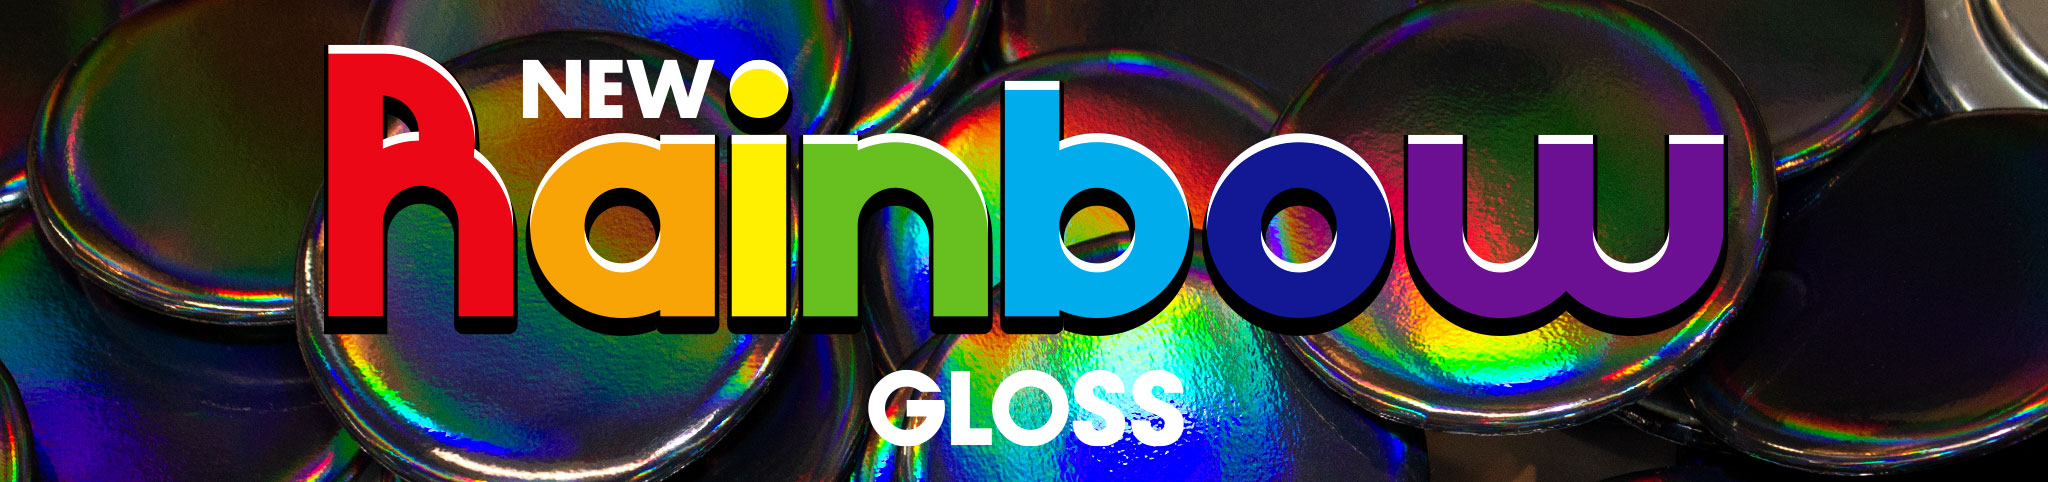 Rainbow Gloss finish now available at PureButtons.com